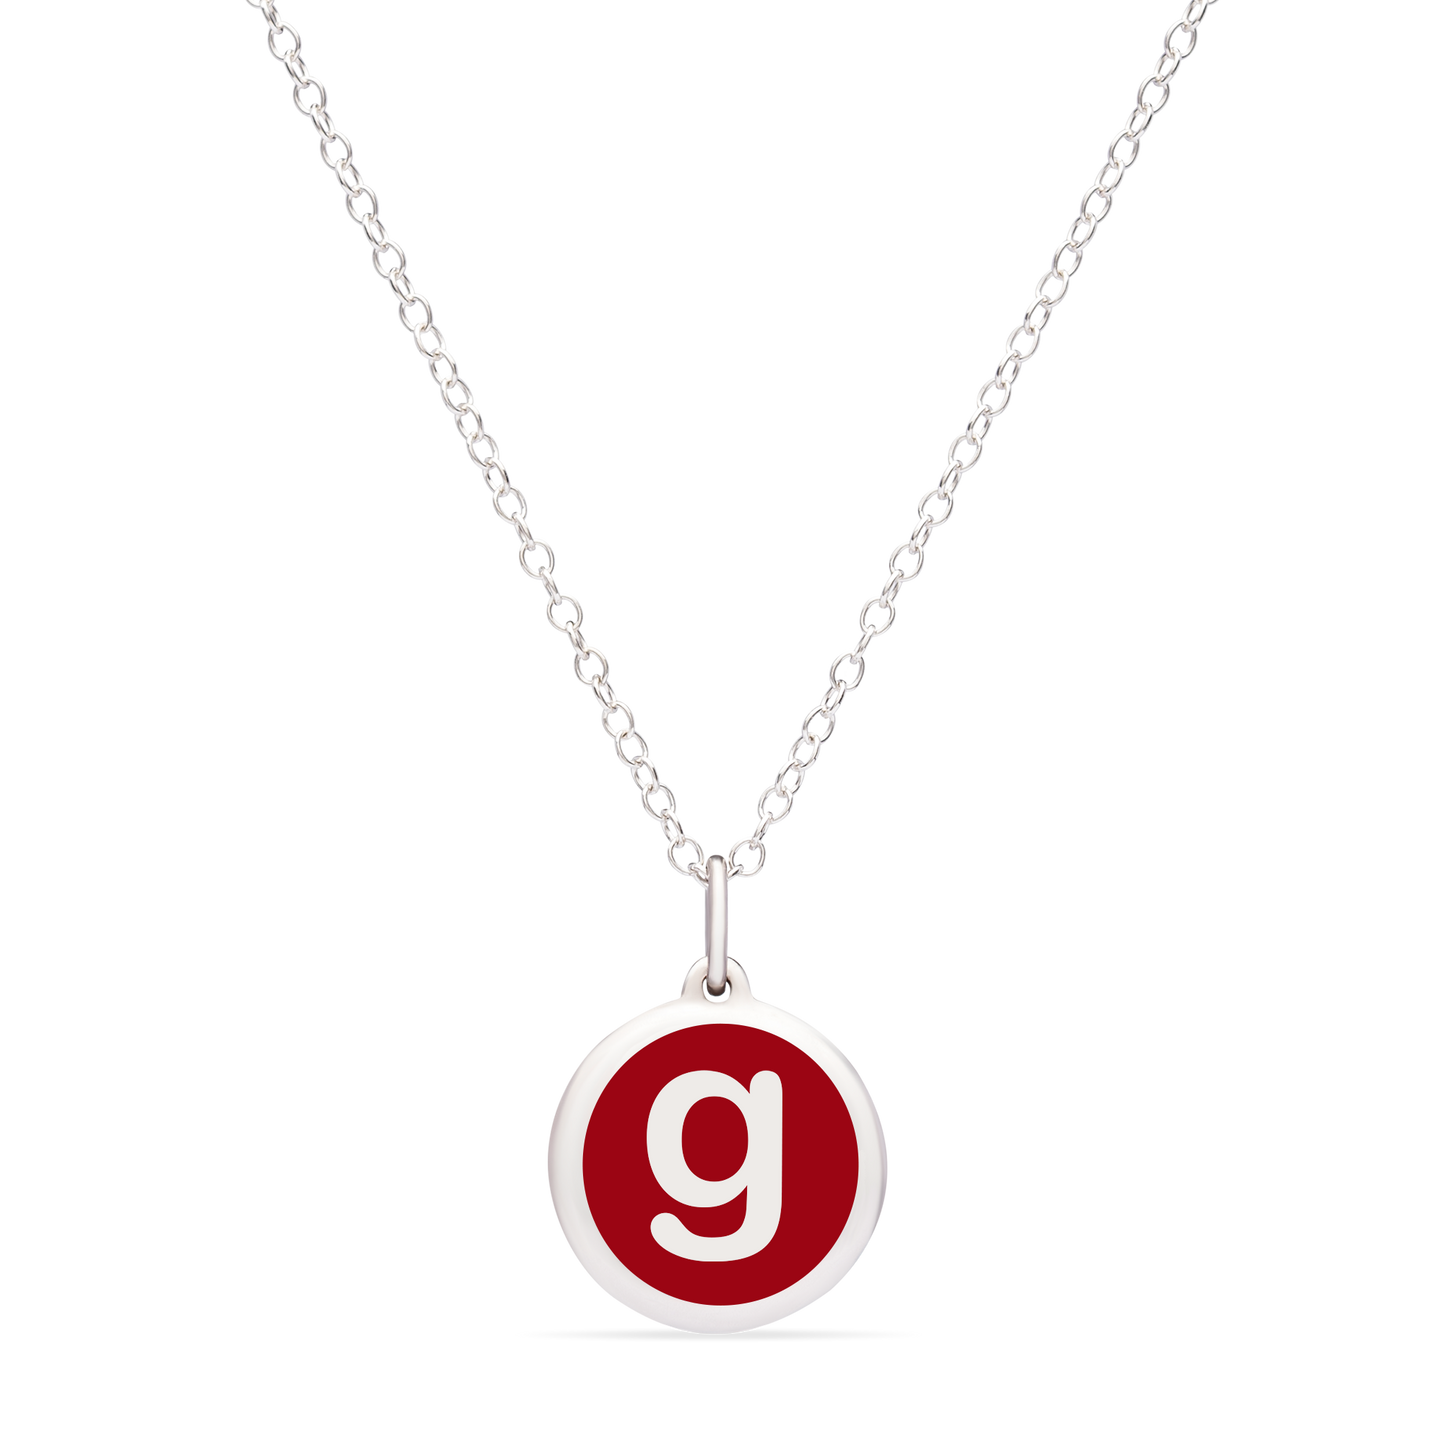 MINI INITIAL 'g' CHARM sterling silver with rhodium plate